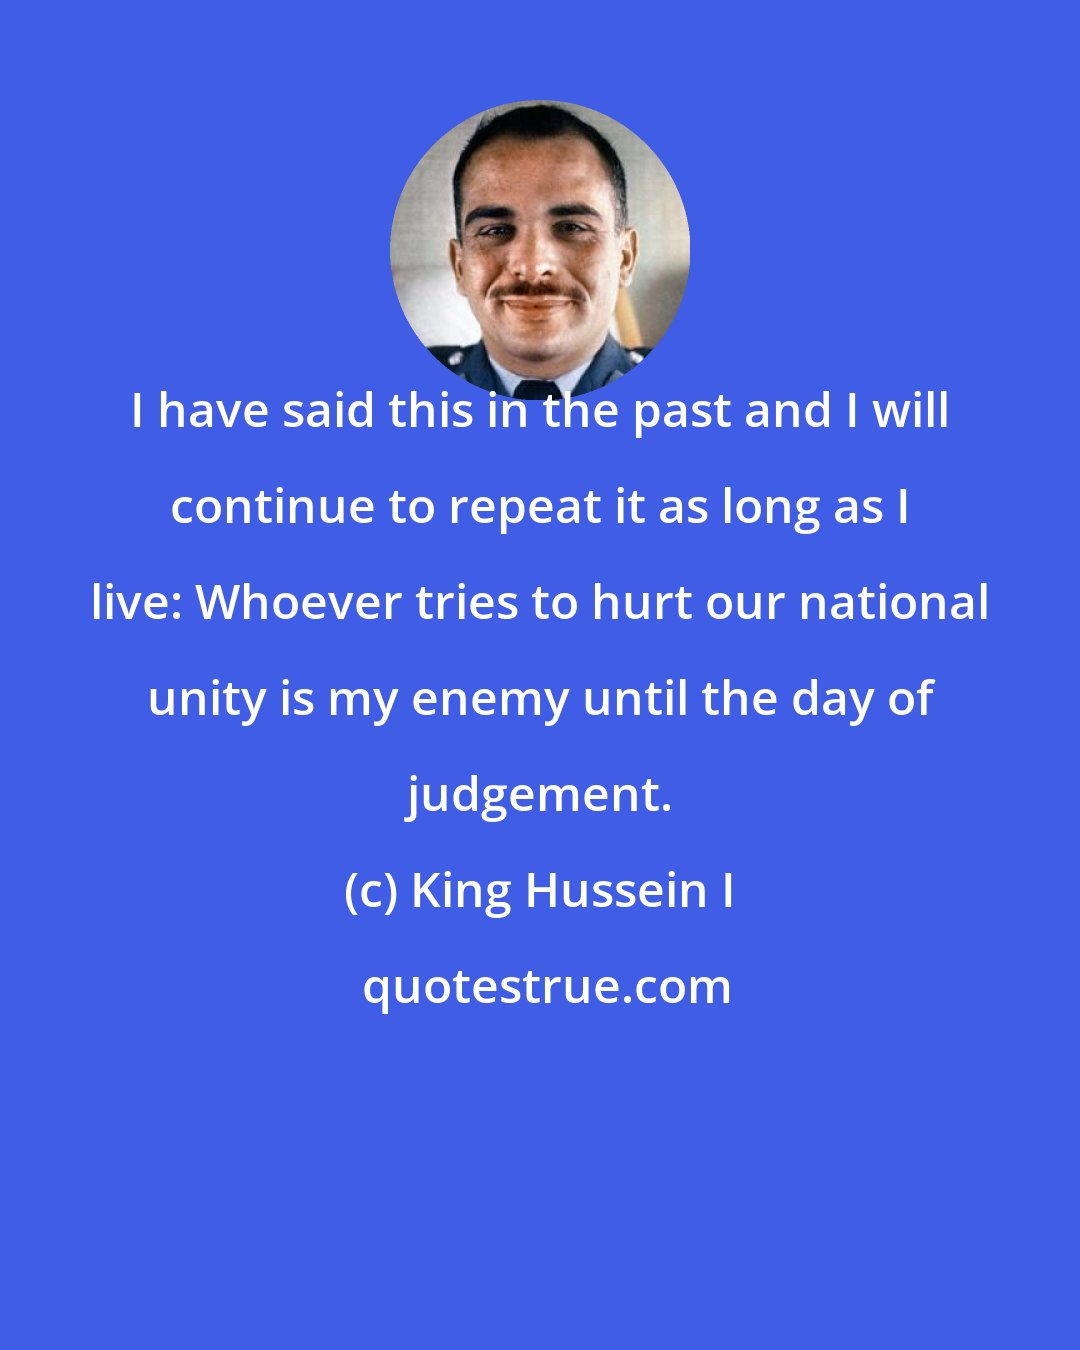 King Hussein I: I have said this in the past and I will continue to repeat it as long as I live: Whoever tries to hurt our national unity is my enemy until the day of judgement.